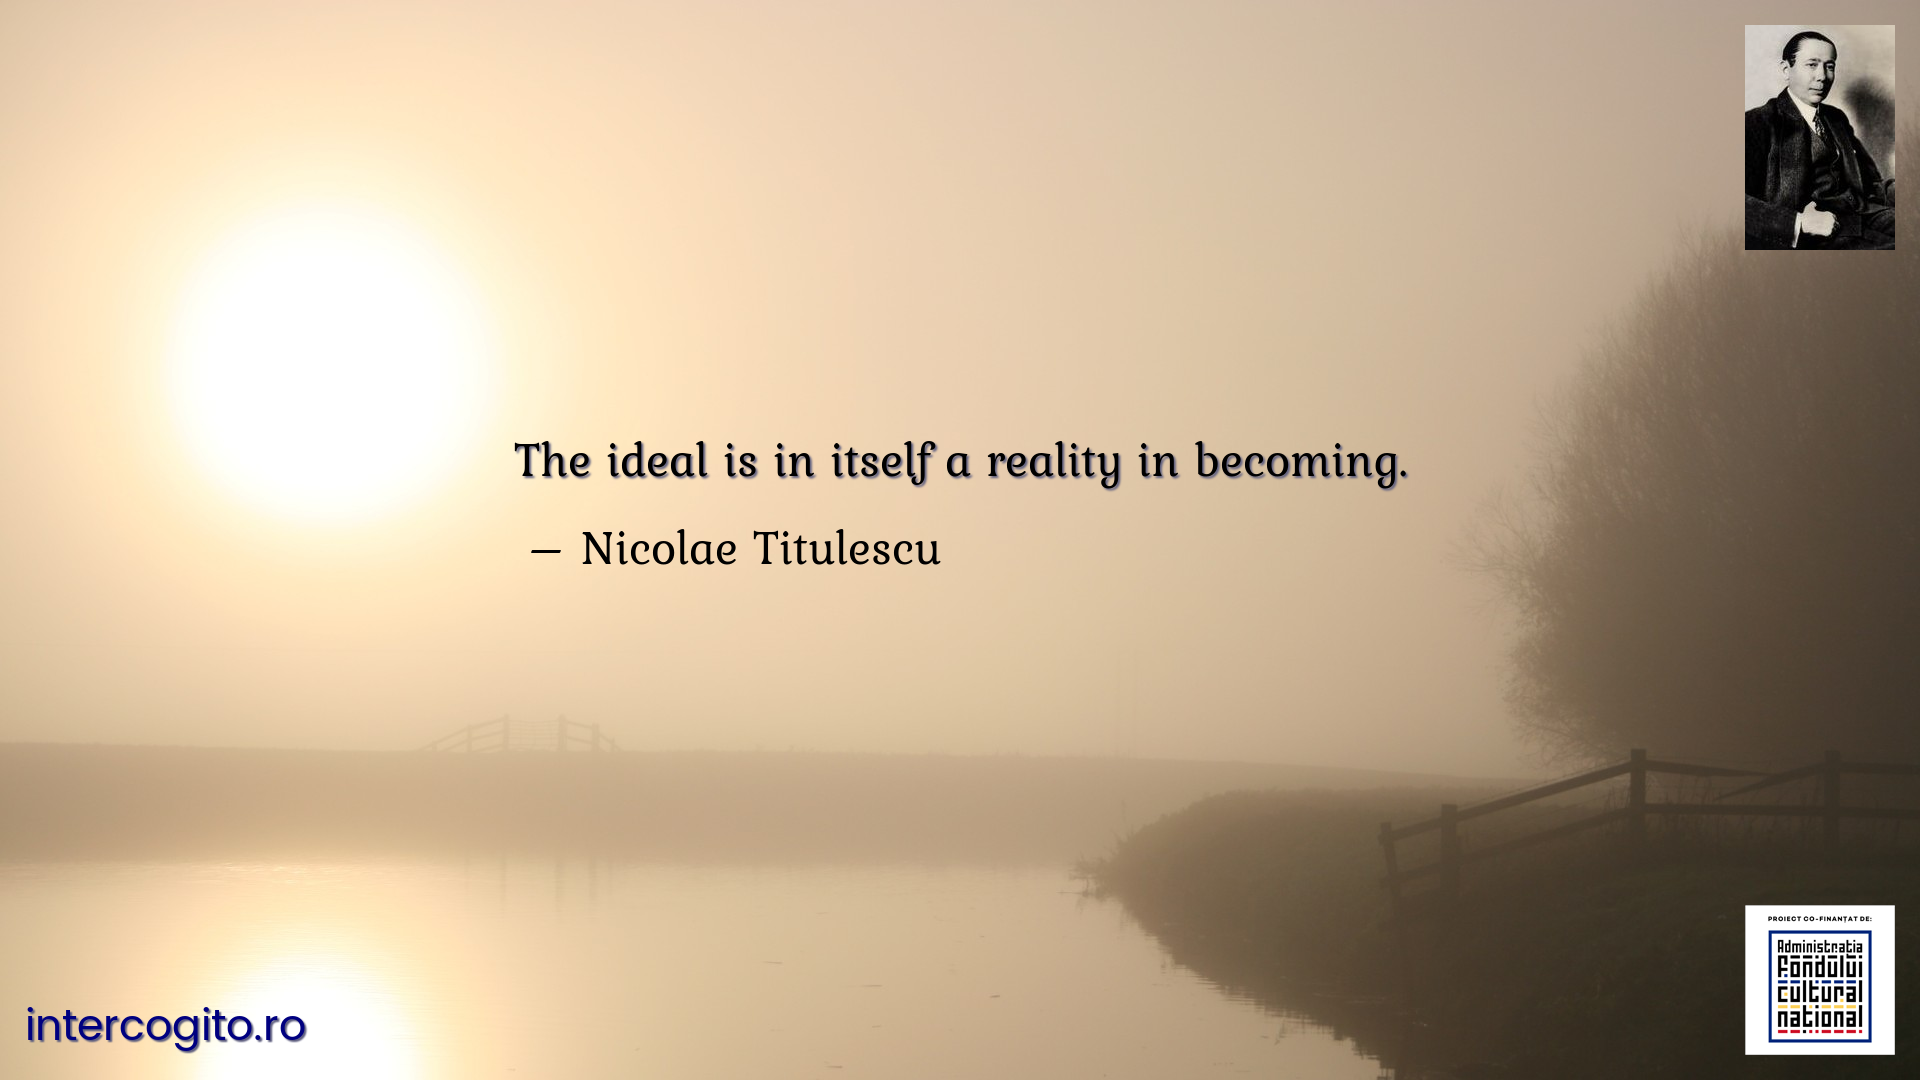 The ideal is in itself a reality in becoming.